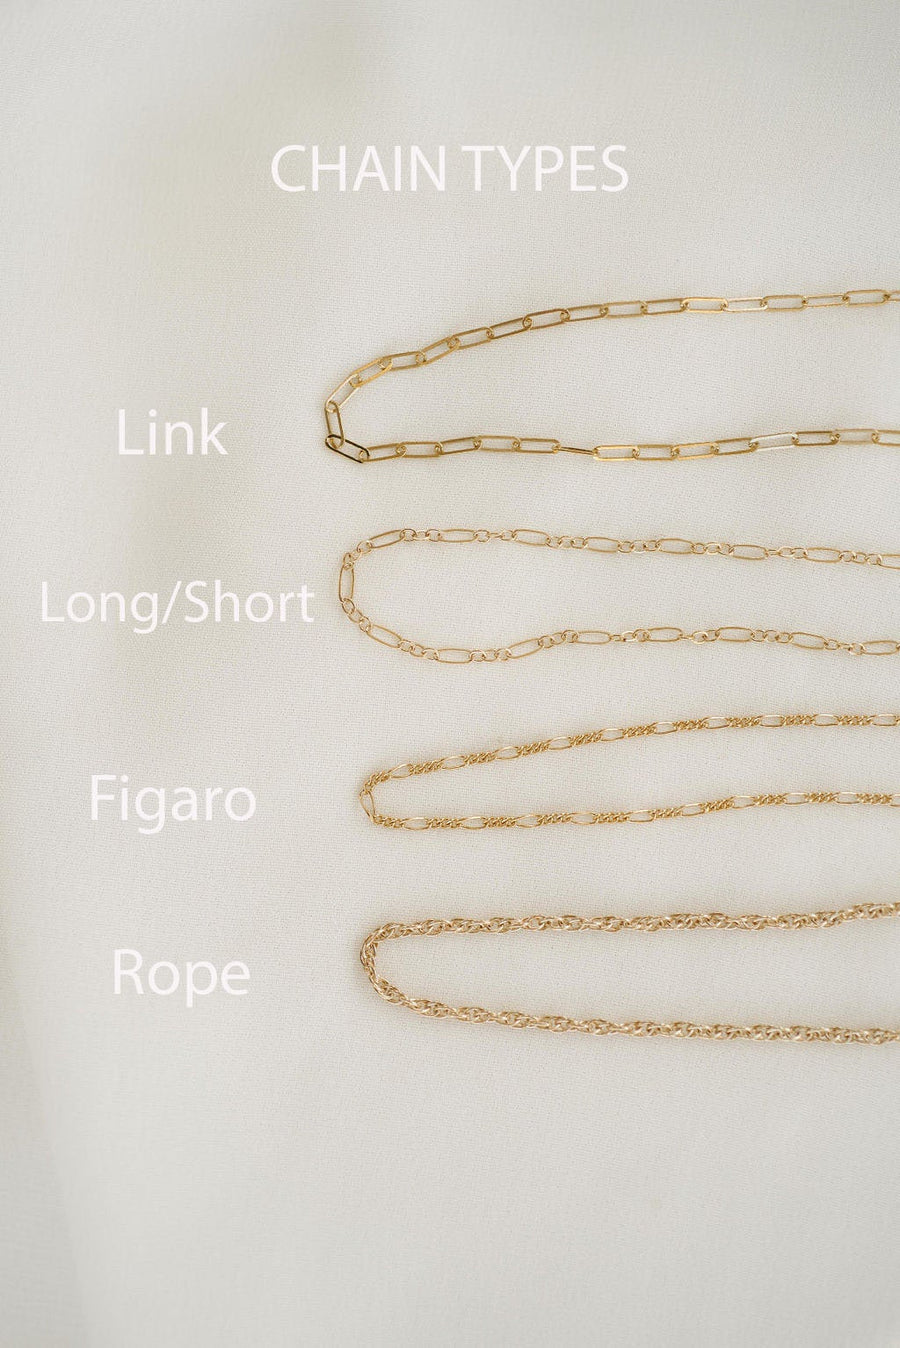 14k Gold Filled Paper Clip Chain Necklace Long Link Layered Stacking  Necklaces | eBay